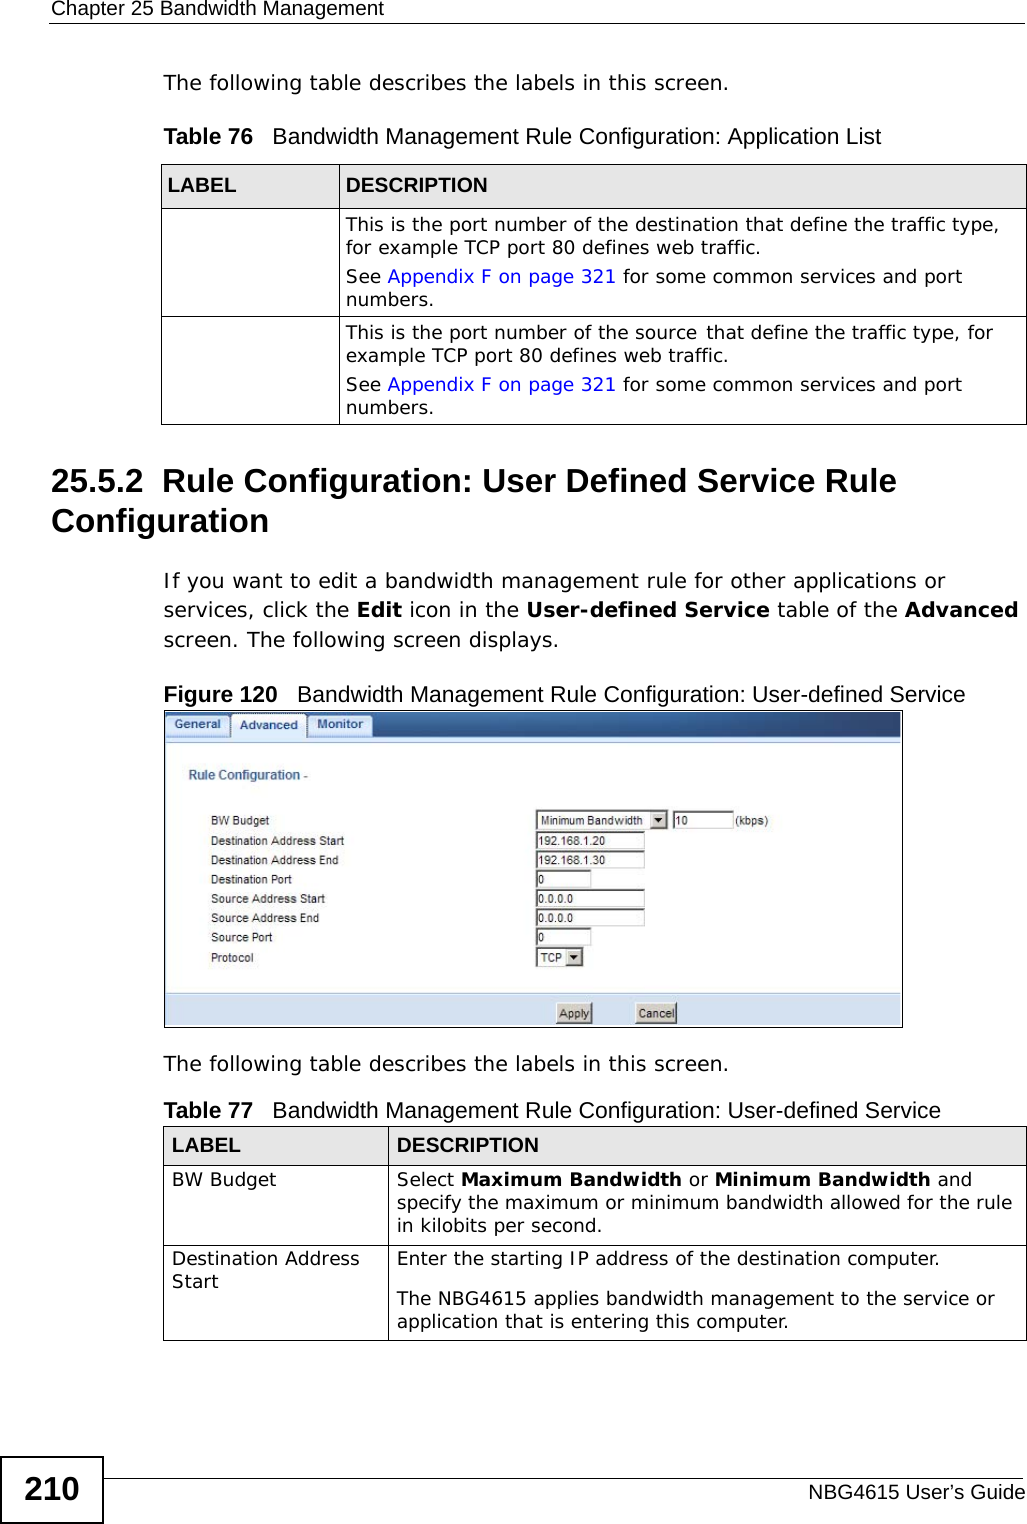 Chapter 25 Bandwidth ManagementNBG4615 User’s Guide210The following table describes the labels in this screen.25.5.2  Rule Configuration: User Defined Service Rule Configuration    If you want to edit a bandwidth management rule for other applications or services, click the Edit icon in the User-defined Service table of the Advanced screen. The following screen displays.Figure 120   Bandwidth Management Rule Configuration: User-defined Service The following table describes the labels in this screen.Table 76   Bandwidth Management Rule Configuration: Application ListLABEL DESCRIPTIONThis is the port number of the destination that define the traffic type, for example TCP port 80 defines web traffic.See Appendix F on page 321 for some common services and port numbers.This is the port number of the source that define the traffic type, for example TCP port 80 defines web traffic.See Appendix F on page 321 for some common services and port numbers.Table 77   Bandwidth Management Rule Configuration: User-defined ServiceLABEL DESCRIPTIONBW Budget Select Maximum Bandwidth or Minimum Bandwidth and specify the maximum or minimum bandwidth allowed for the rule in kilobits per second. Destination Address Start Enter the starting IP address of the destination computer.The NBG4615 applies bandwidth management to the service or application that is entering this computer. 